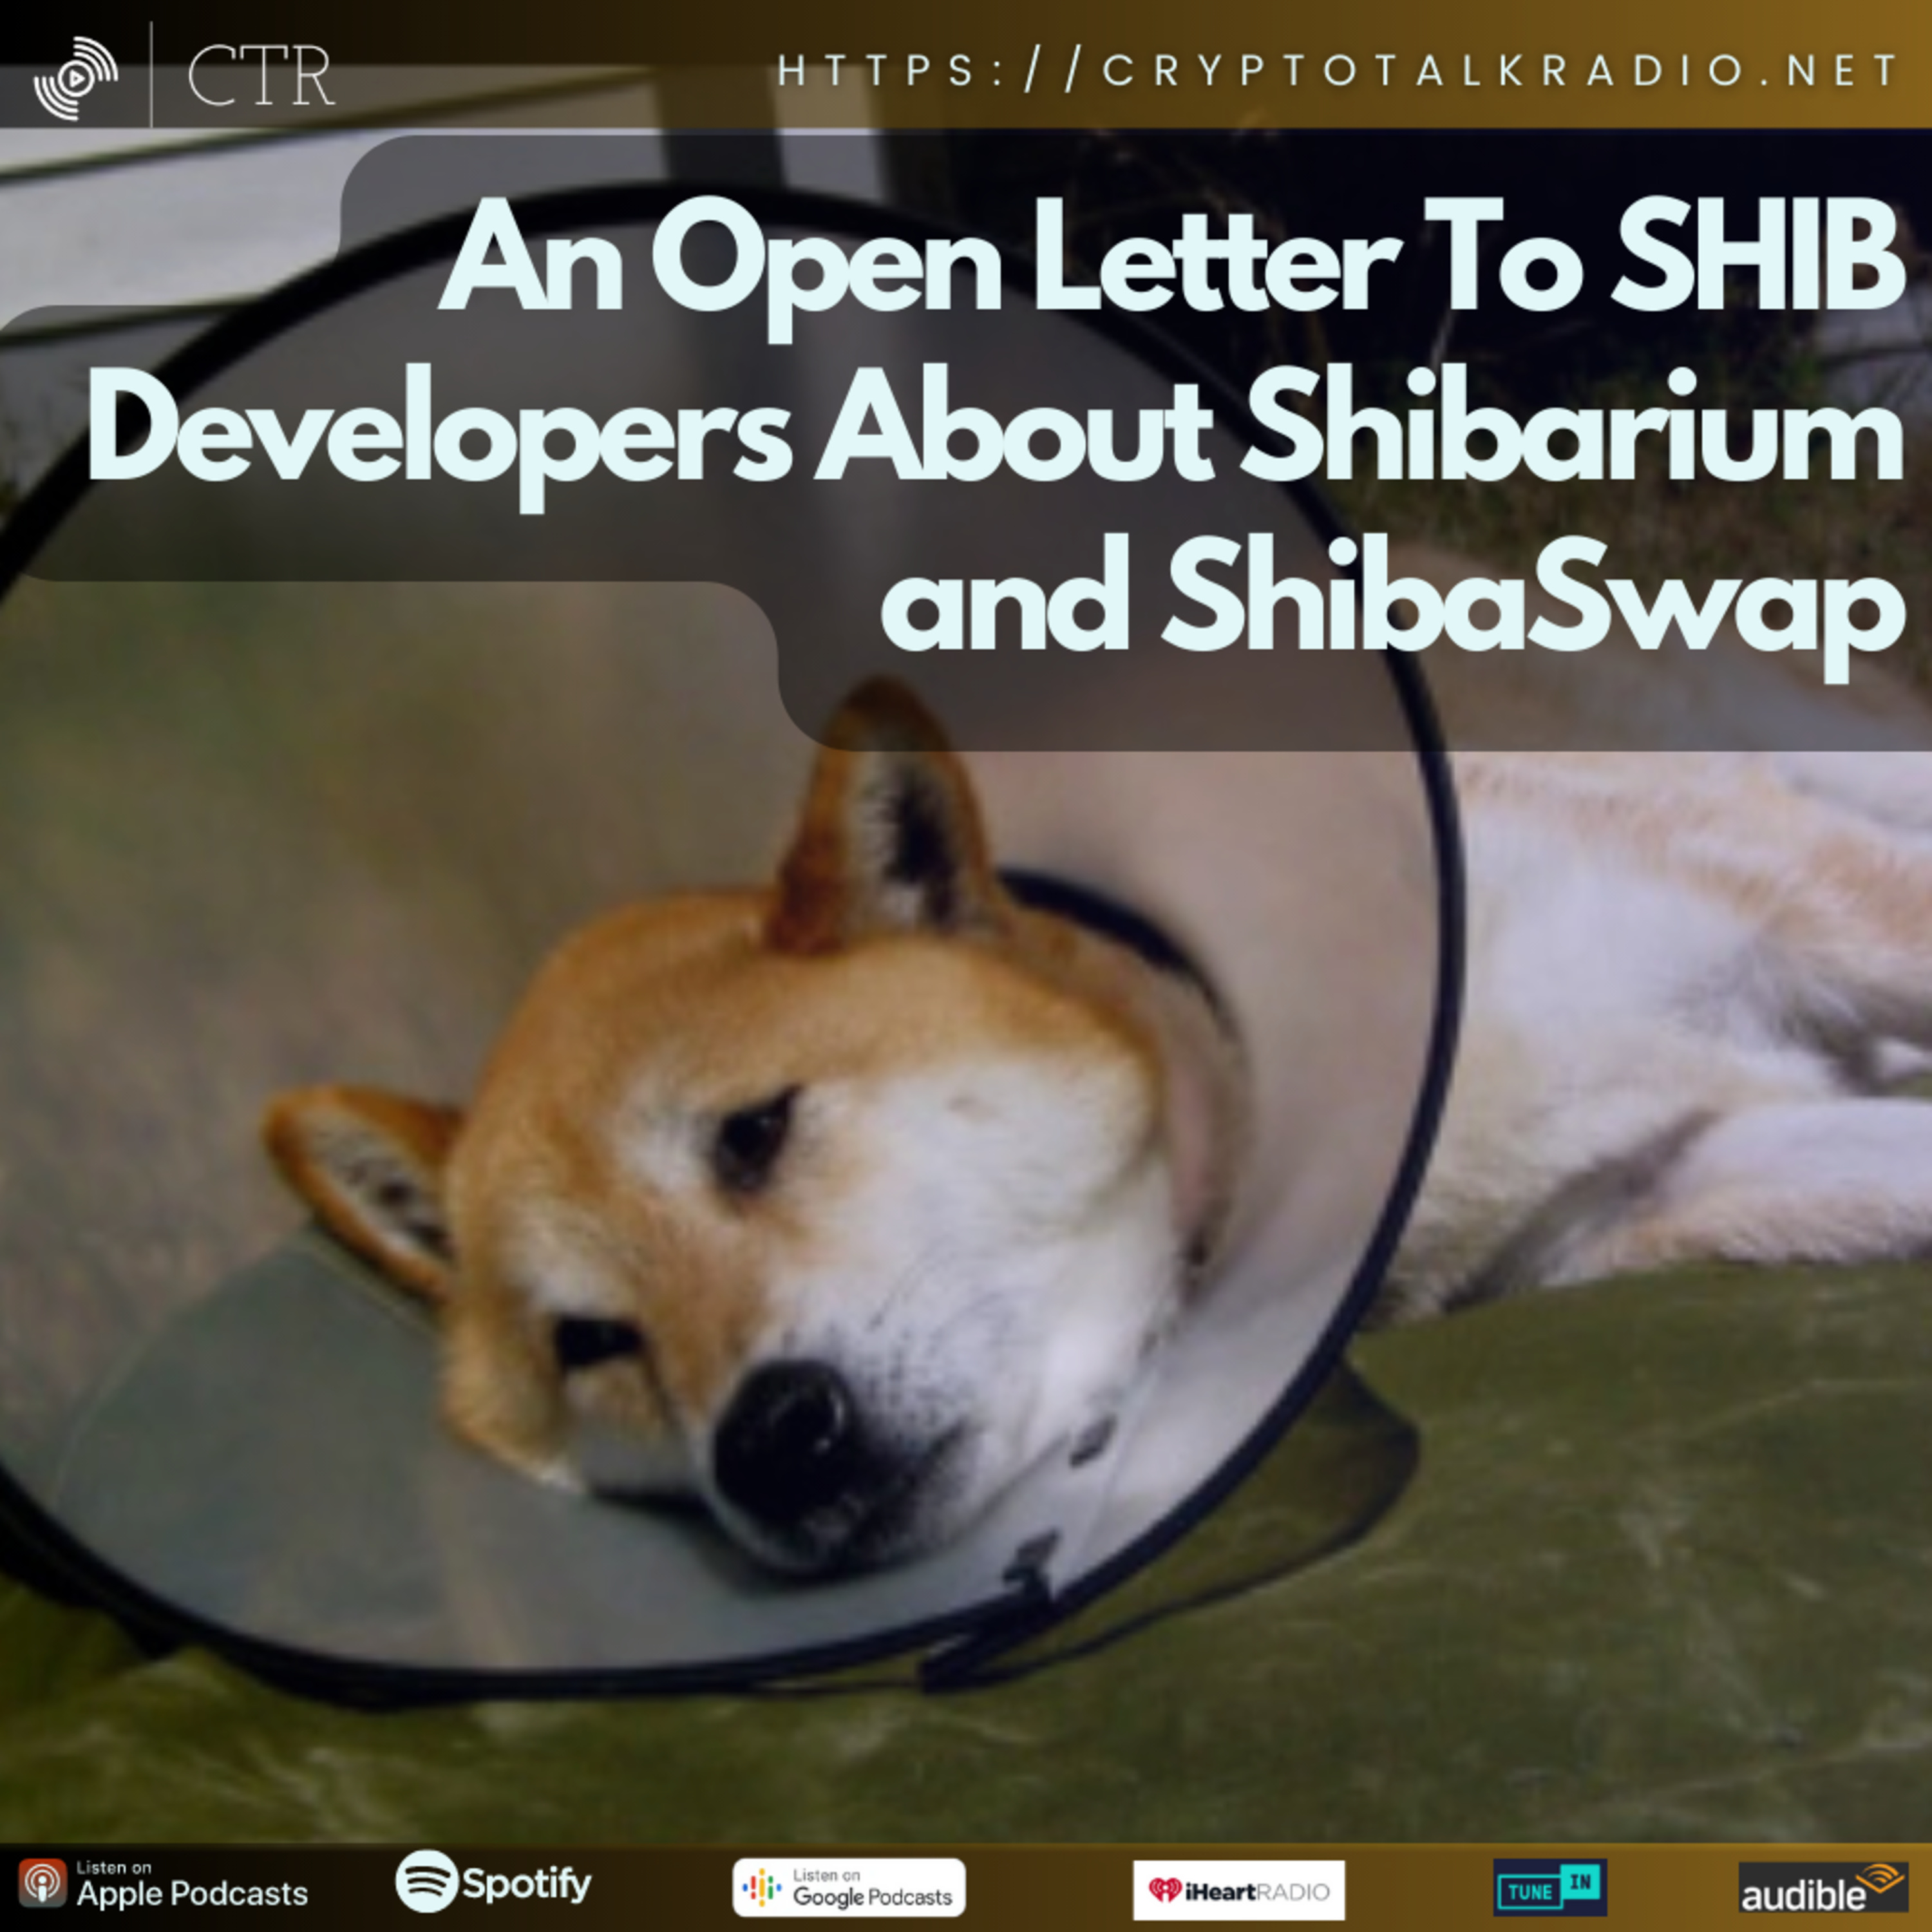 An Open Letter To #SHIB Developers About #Shibarium and #ShibaSwap